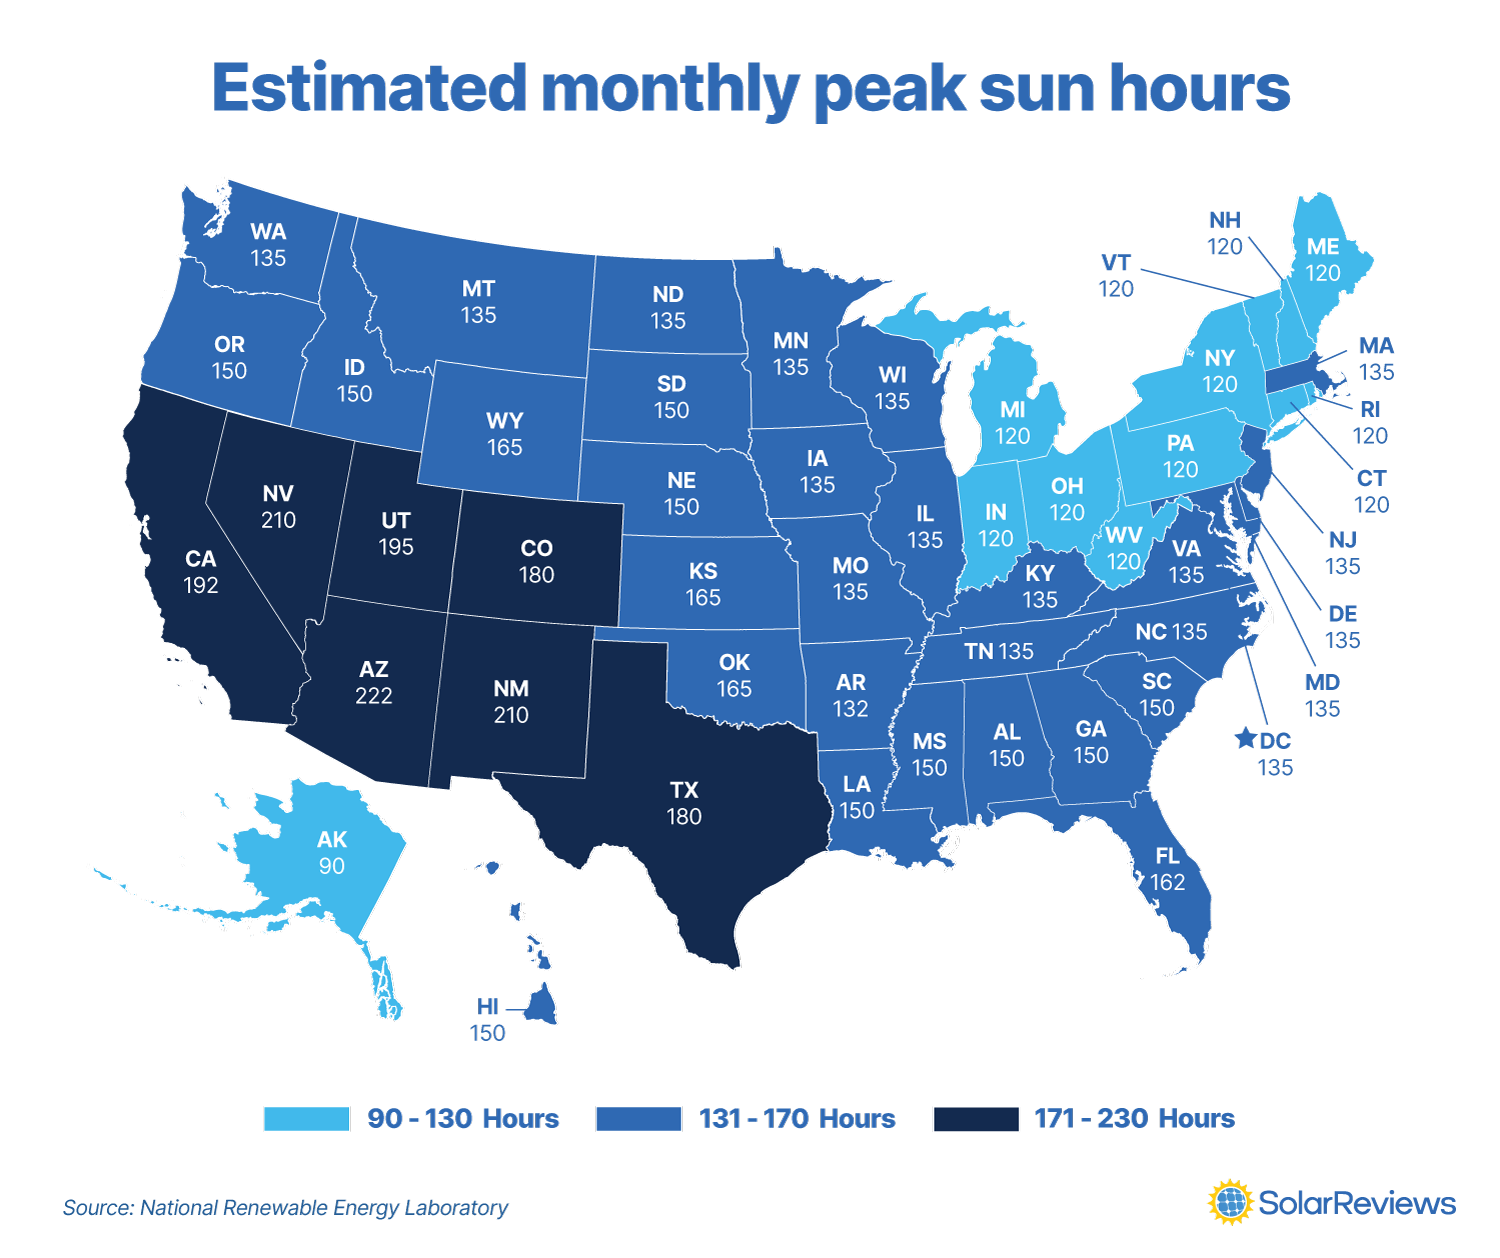 A map outline estimated monthly peak sun hours a state receives based on data from the National Renewable Energy Laboratory. The northeastern United States receives the least amount of sunlight with around 120 monthly peak sun hours, the south east, midwest, and north western U.S. receives between 135 and 165 PSH, and the south west and west coast receive upwards of 180 monthly peak sun hours.